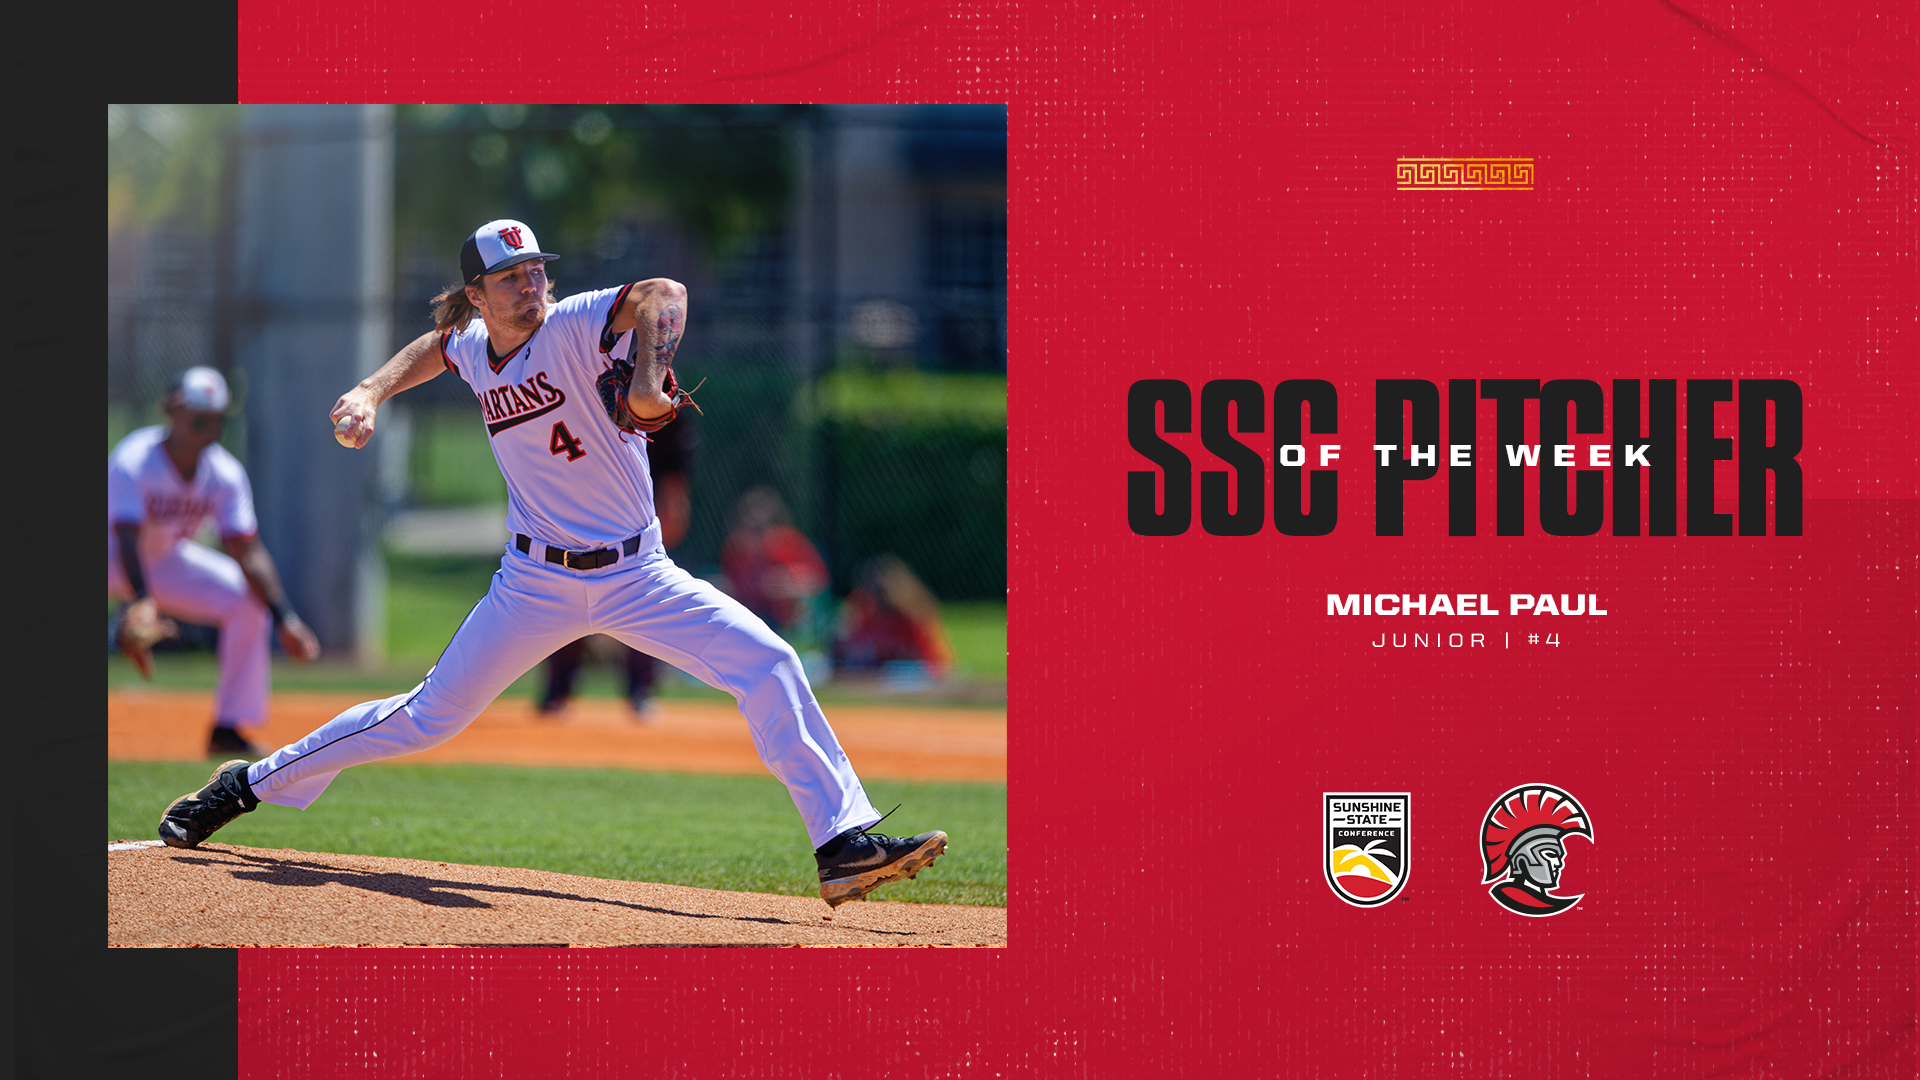 Michael Paul SSC Pitcher of the Week